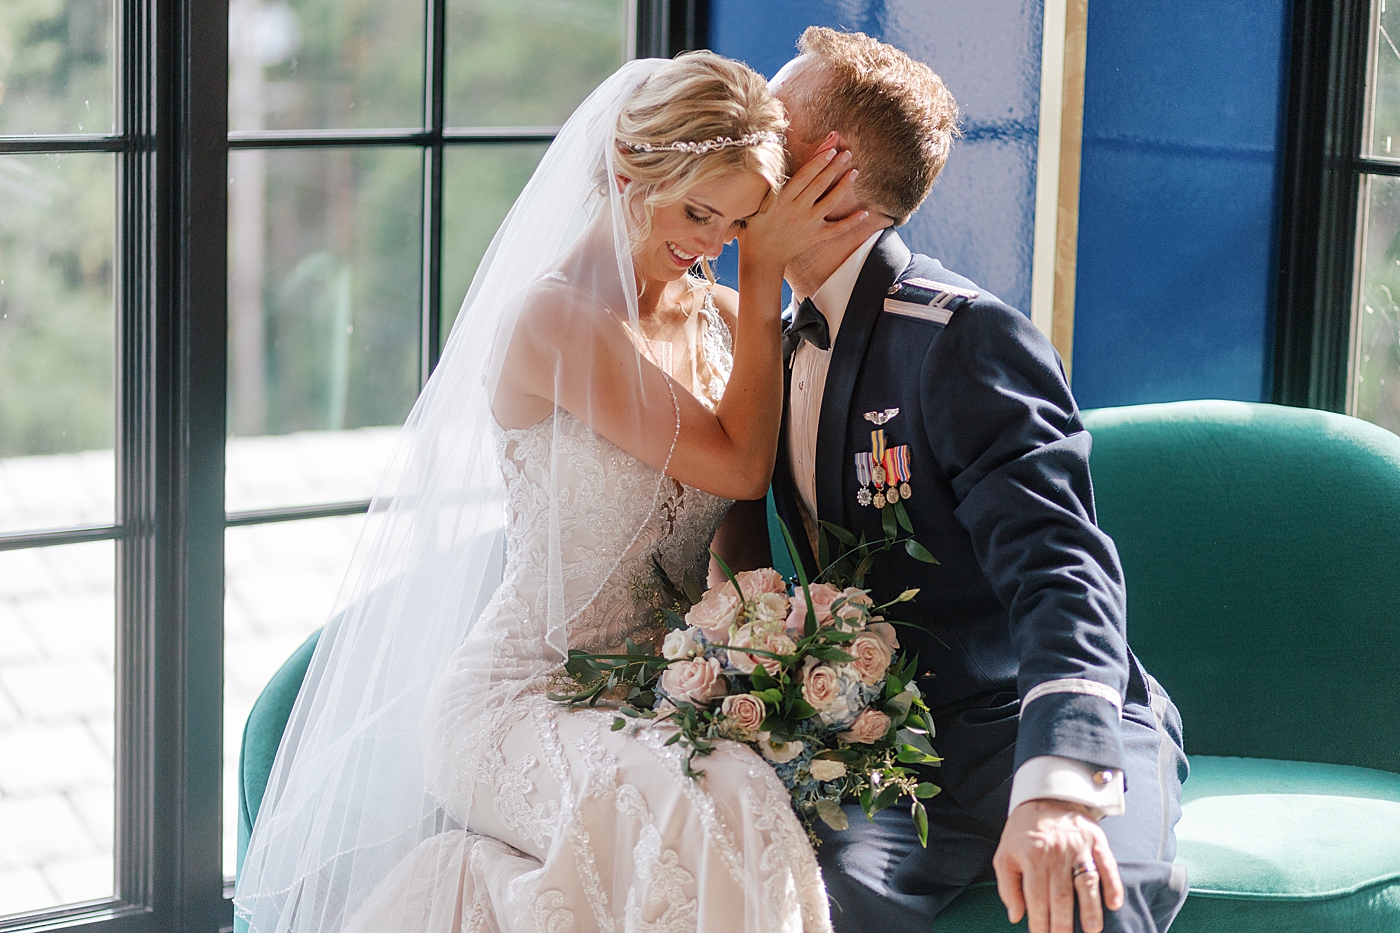 Bride and groom sitting on a green couch | Image by Hope Helmuth Photography